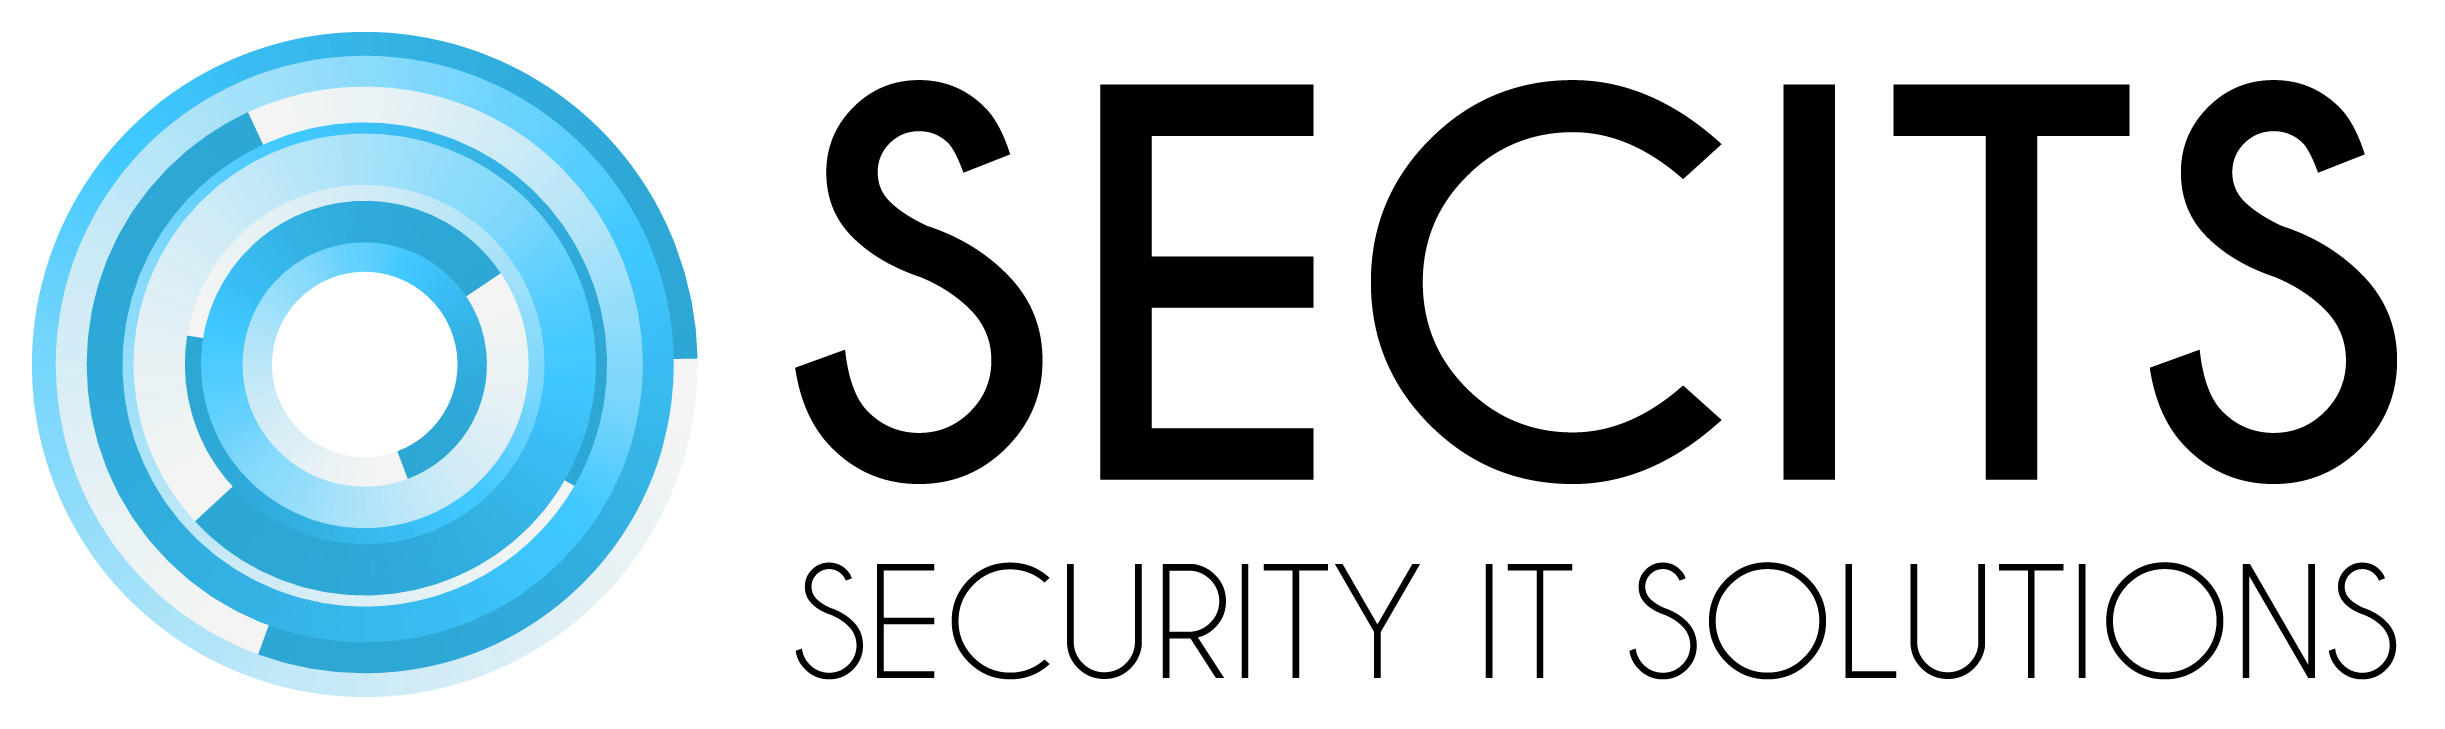 SECITS SECURITY IT SOLUTIONS